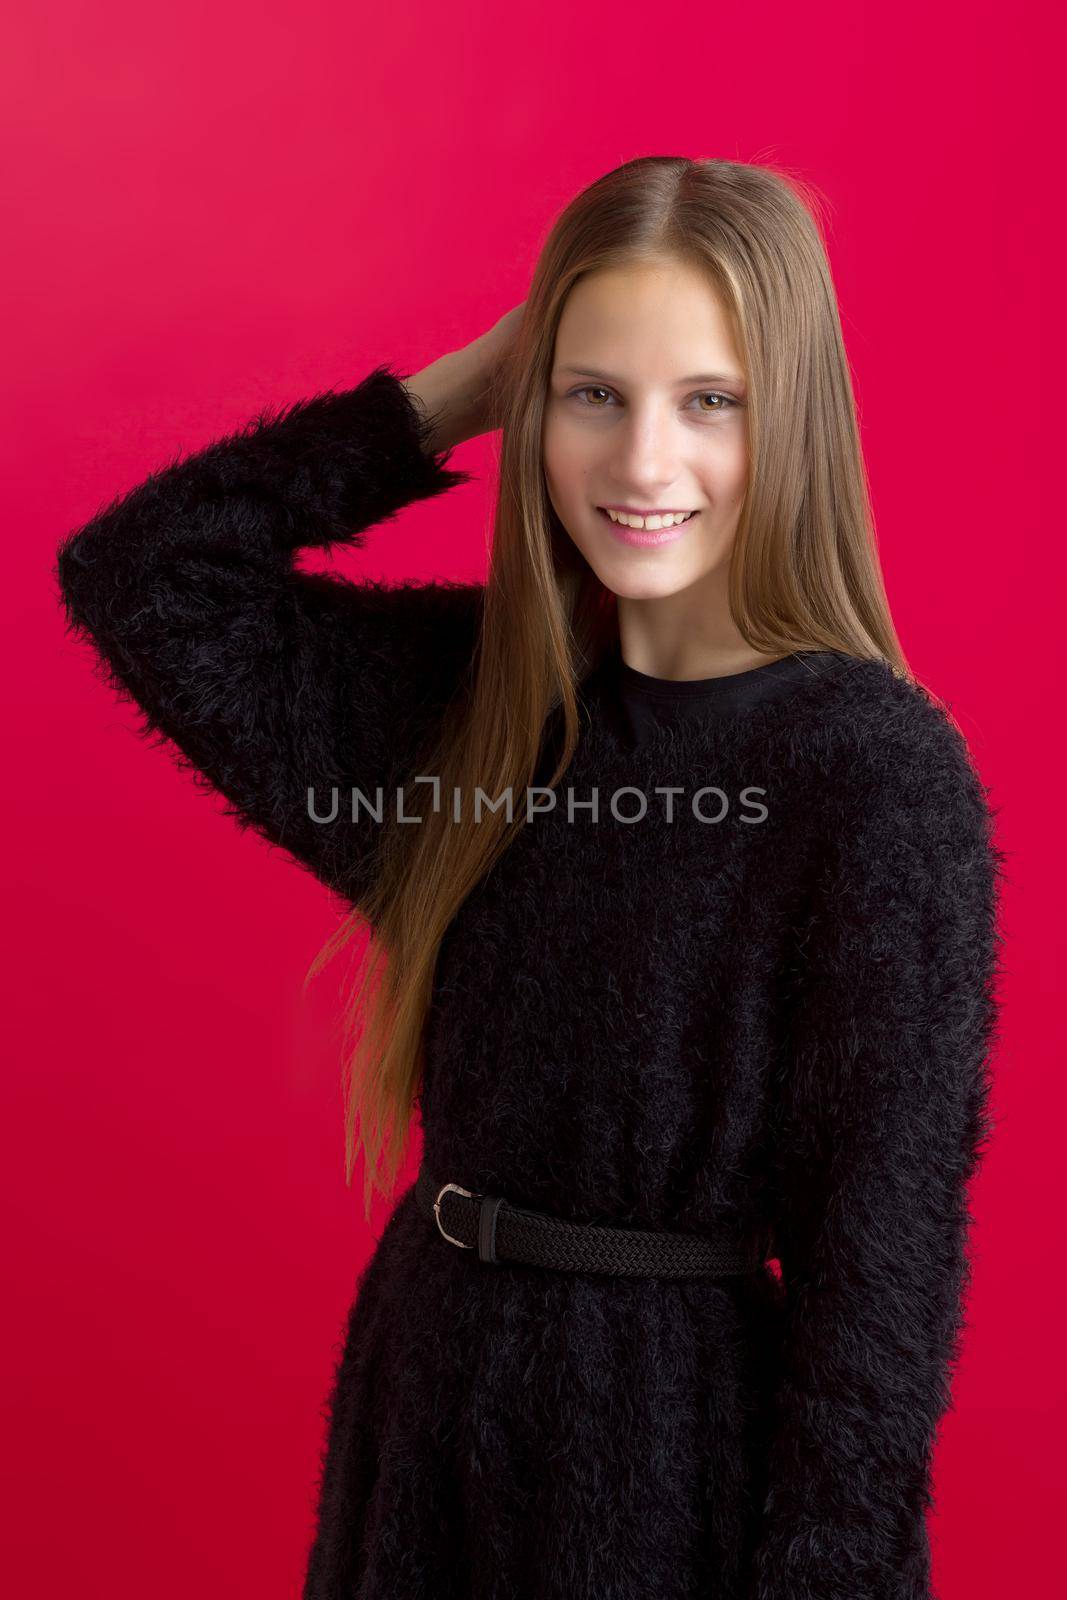 Beautiful teenage girl touching her long hair. Portrait of charming smiling teenager wearing black stylish oversized sweater with leather belt standing on red background